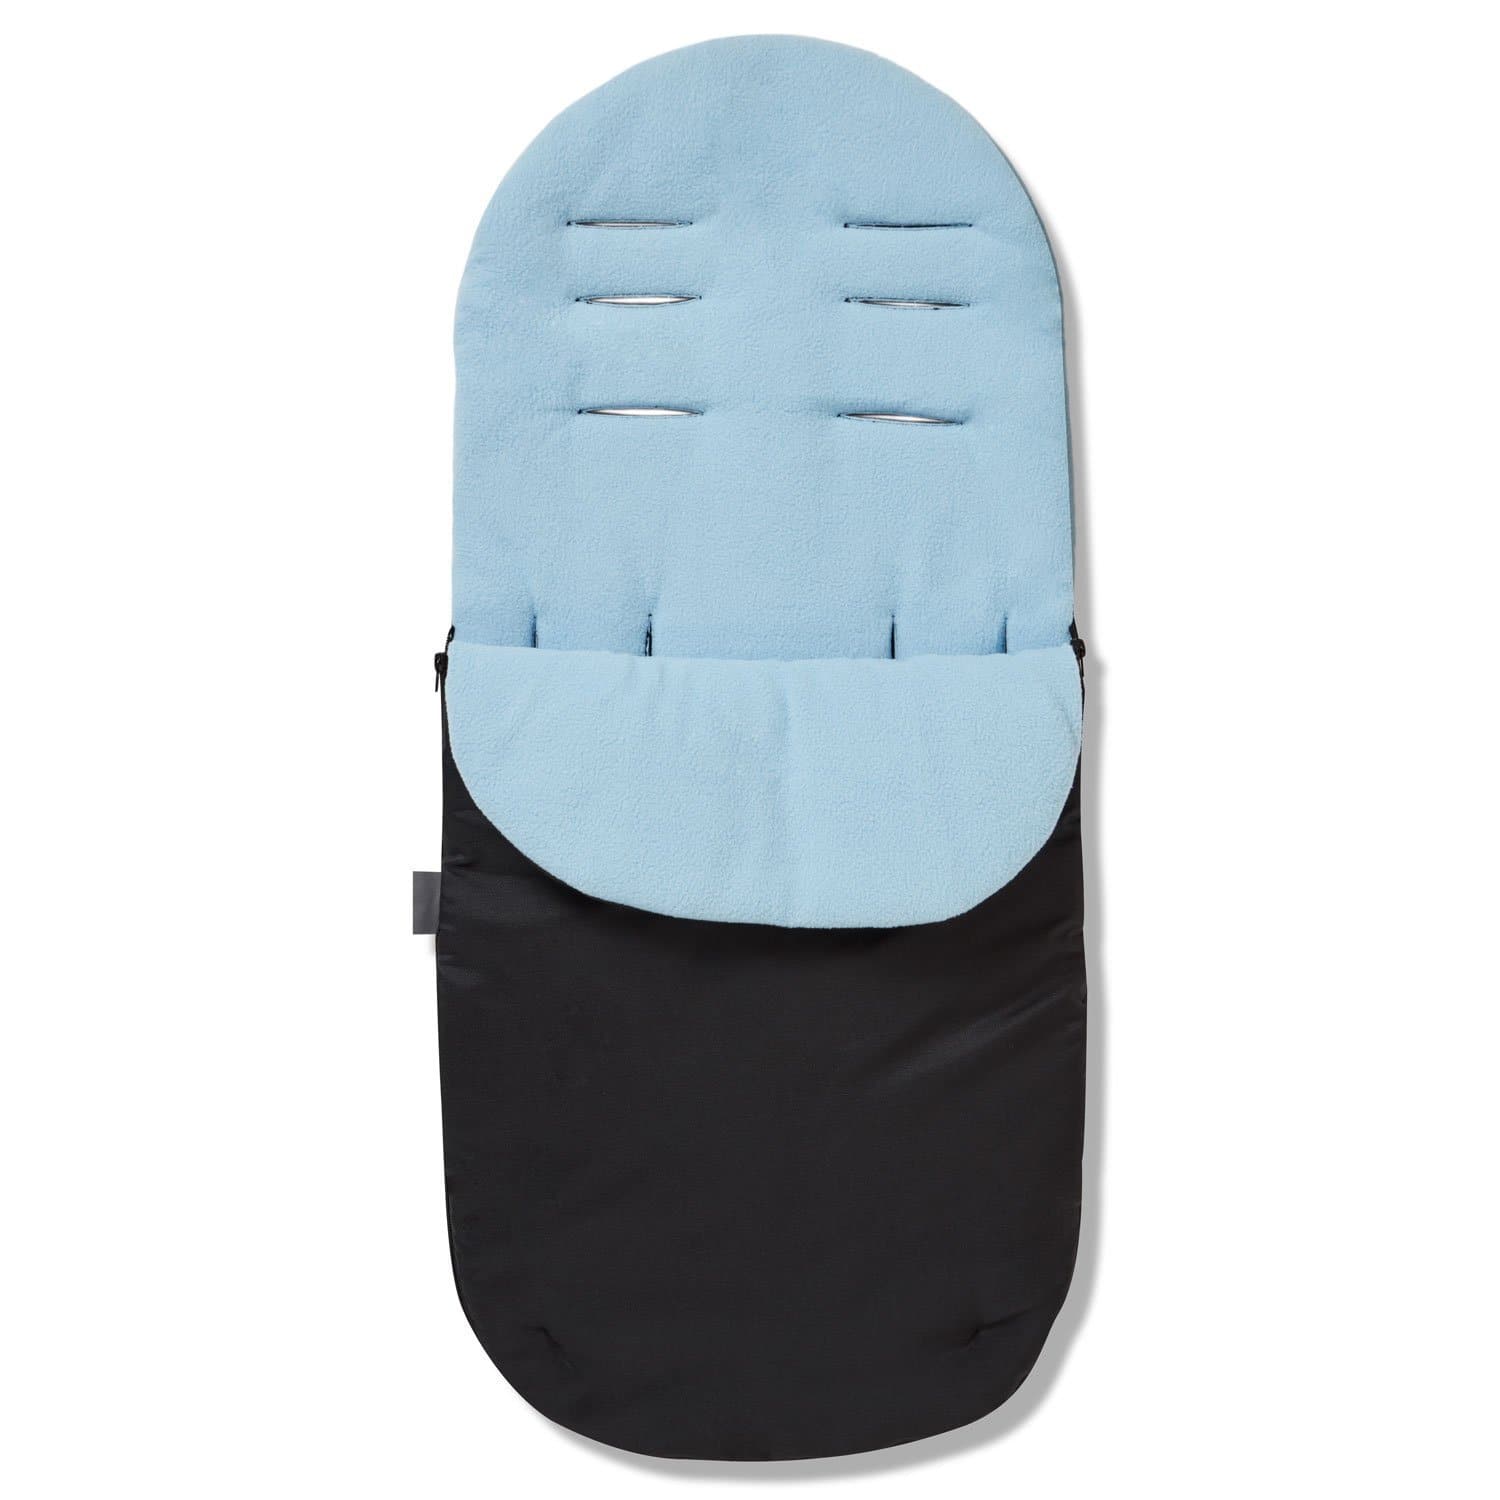 Footmuff / Cosy Toes Compatible with Bebe 9 - Light Blue / Fits All Models | For Your Little One